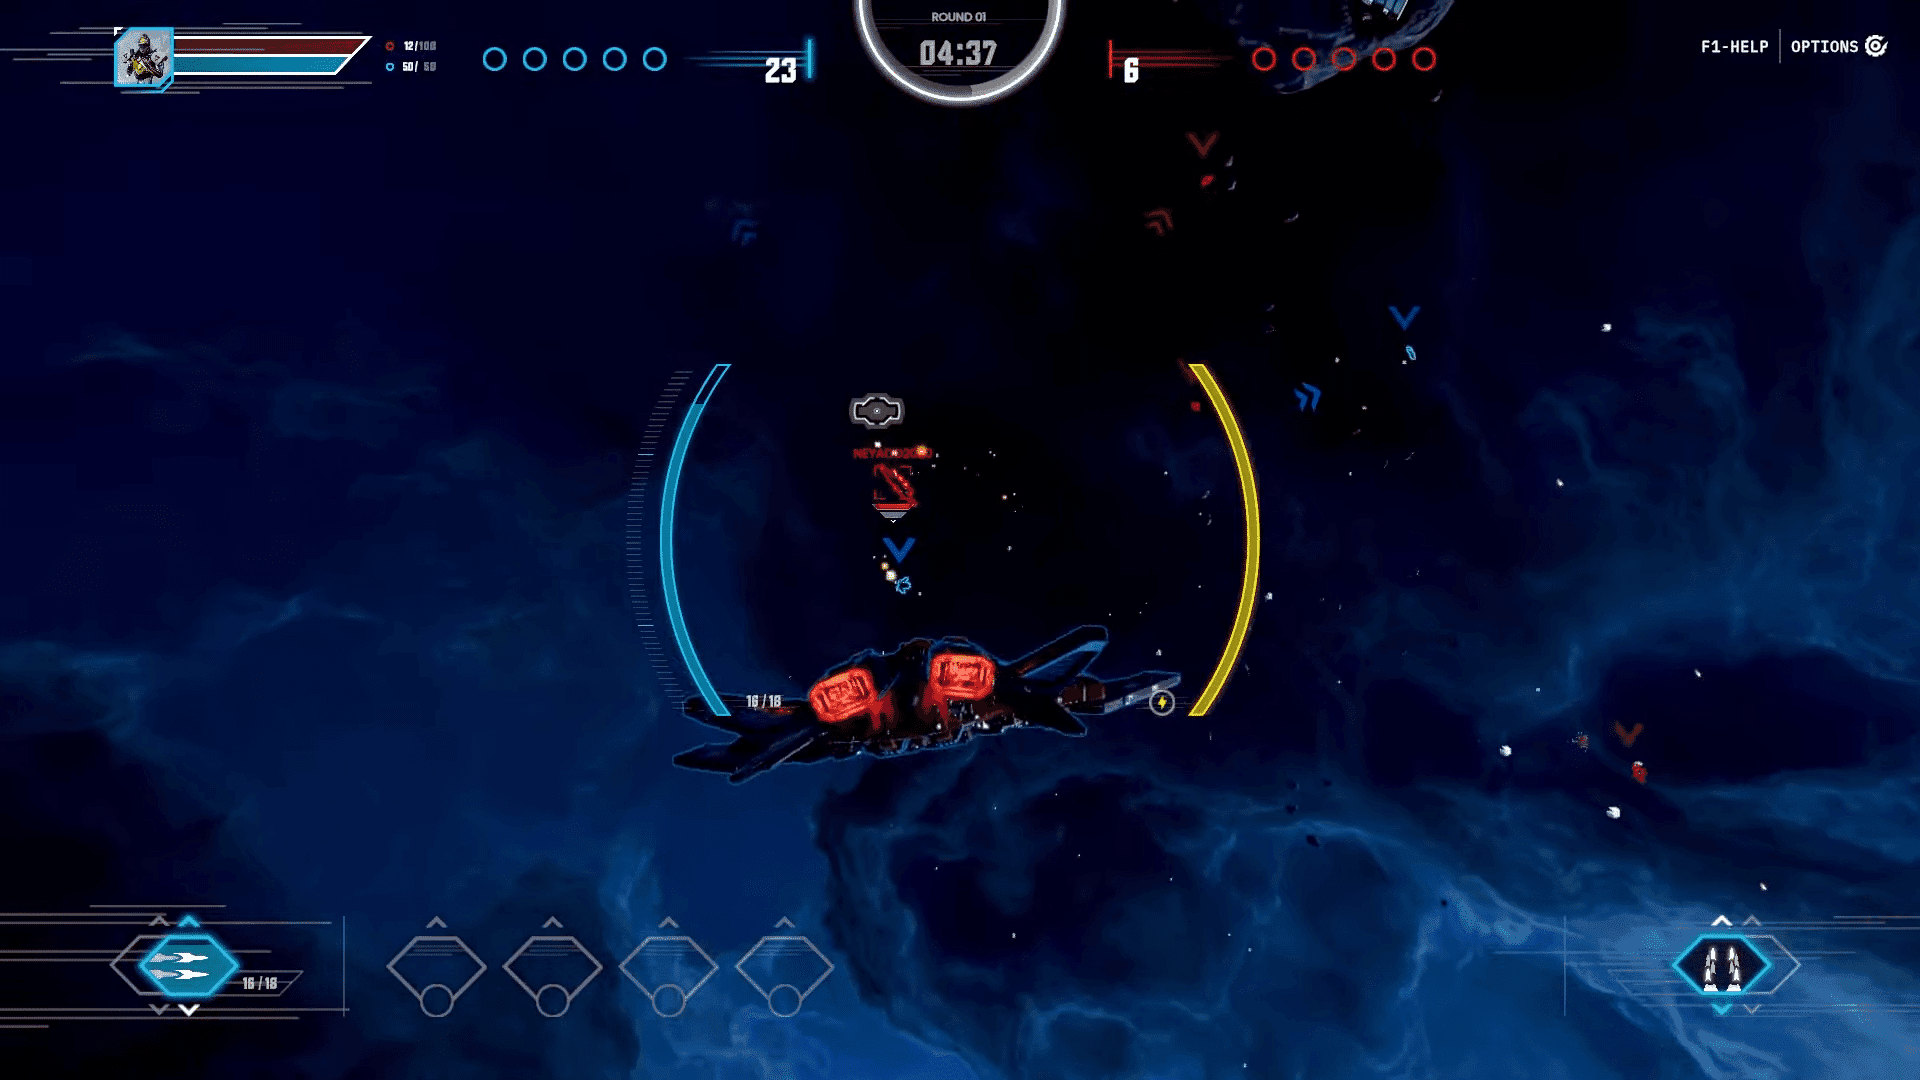 StarHeroes offers thrilling space combat in third-person perspective, allowing players to explore the universe, engage in multiplayer modes.